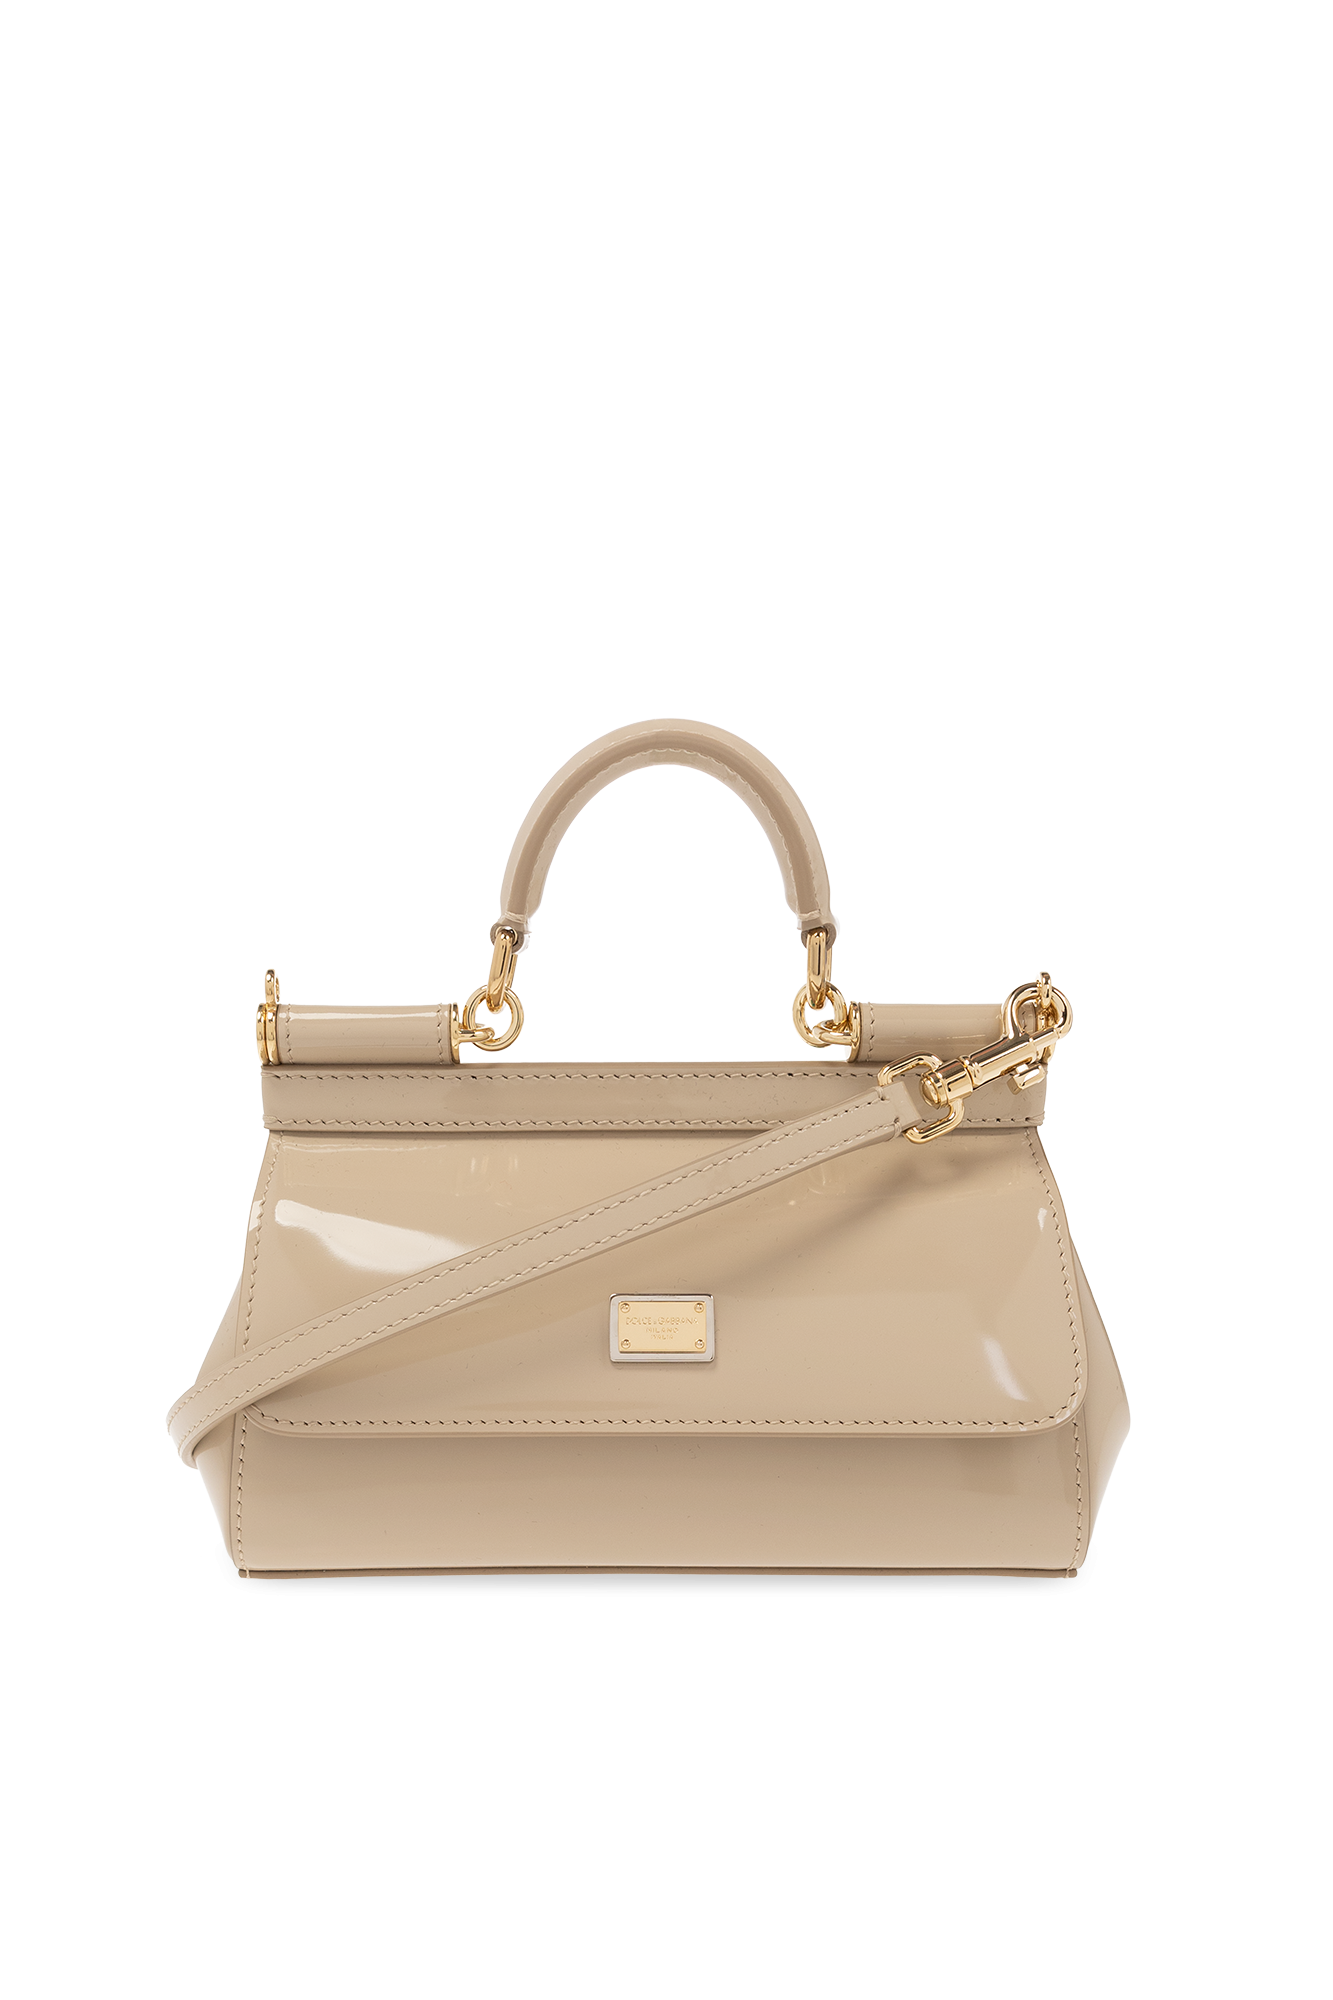 Women's Small Sicily Bag by Dolce & Gabbana